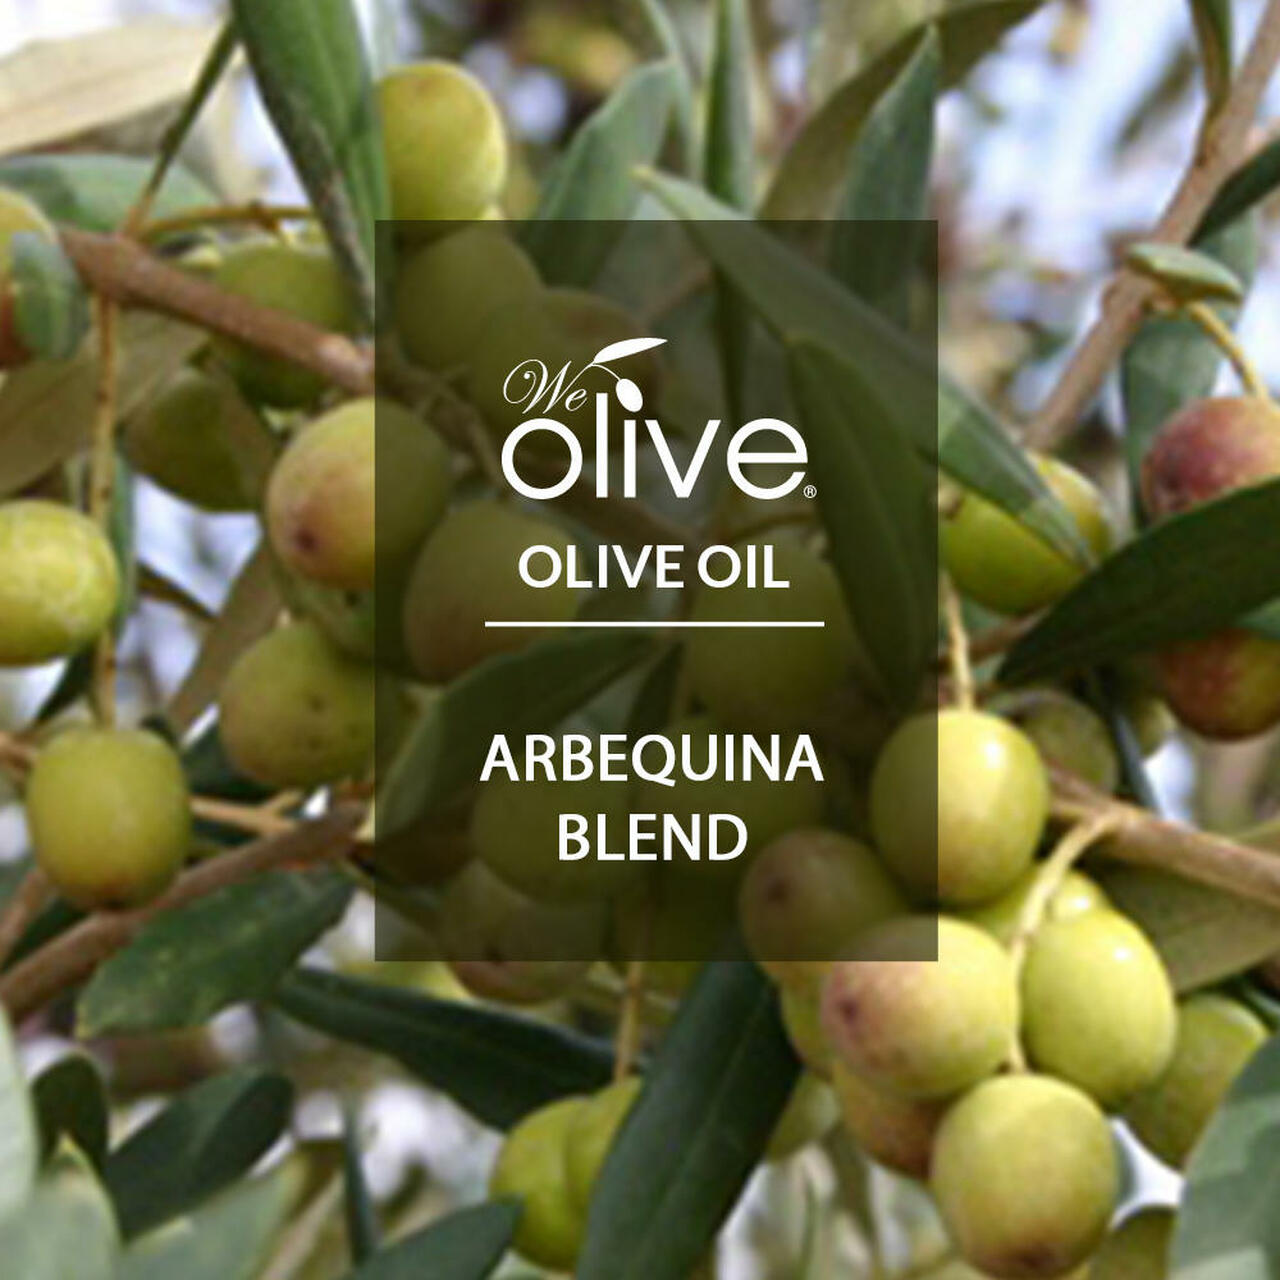 Certified olive oil